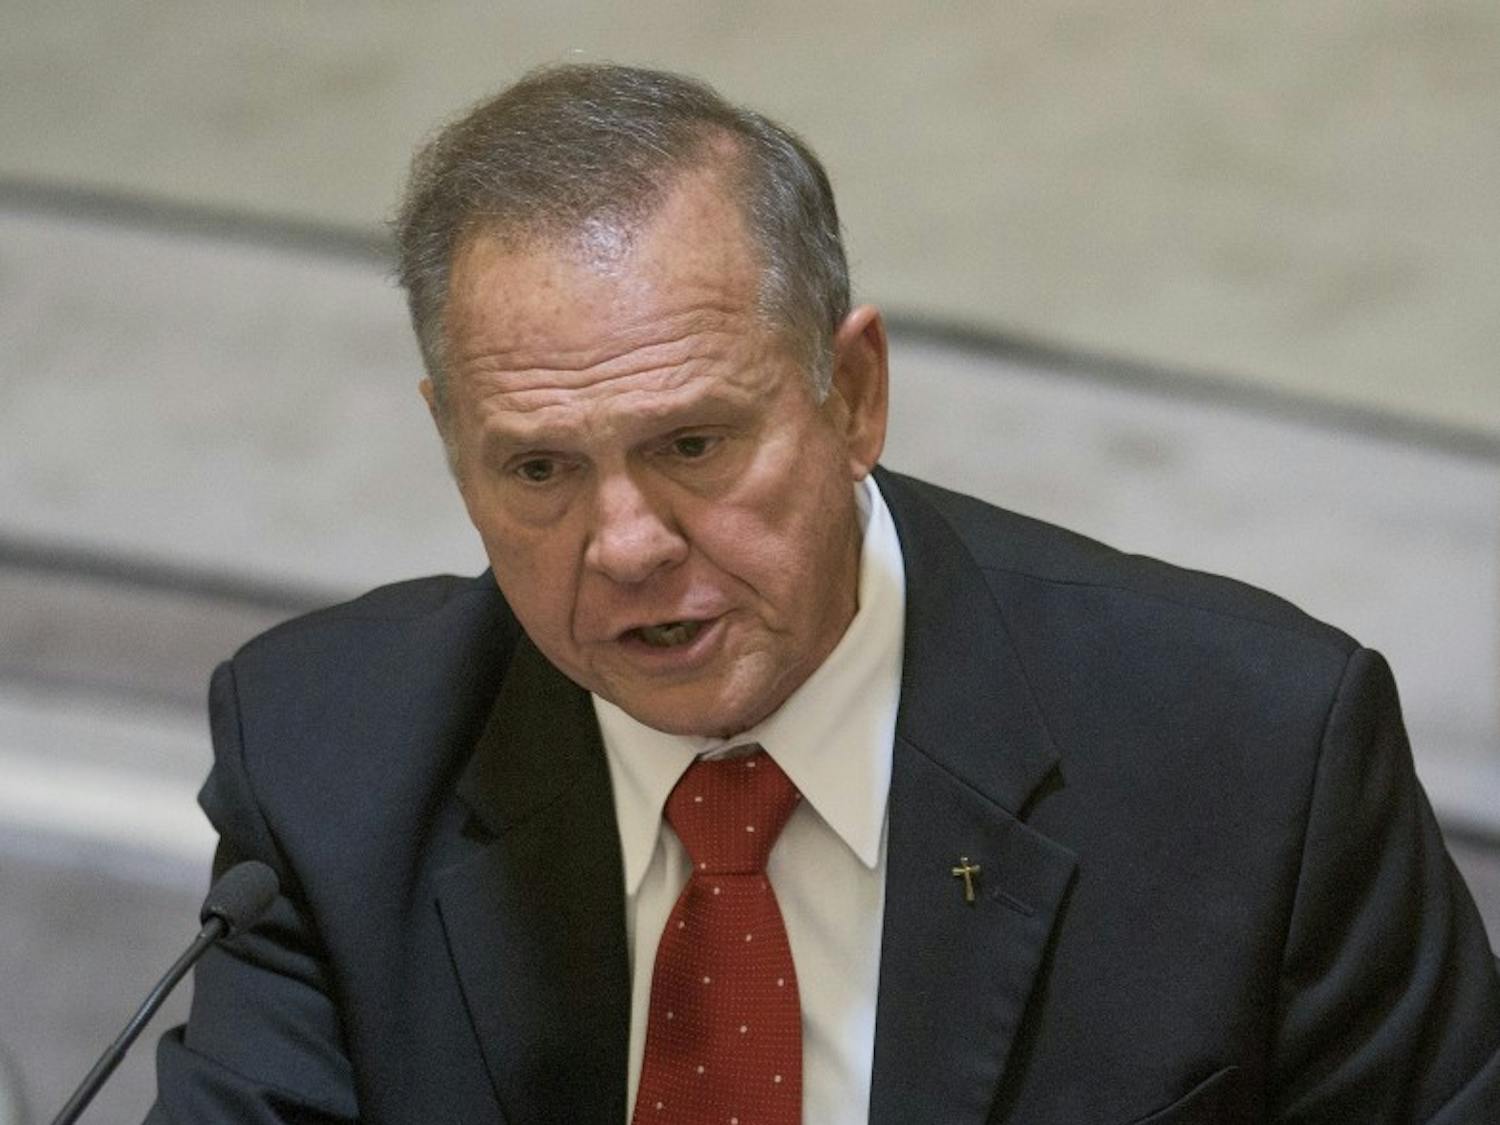 Embattled Alabama Chief Justice Roy Moore testifies during his ethics trial at the Alabama Court of the Judiciary at the Alabama Judicial Building in Montgomery, Ala., on Wednesday September 28, 2016.